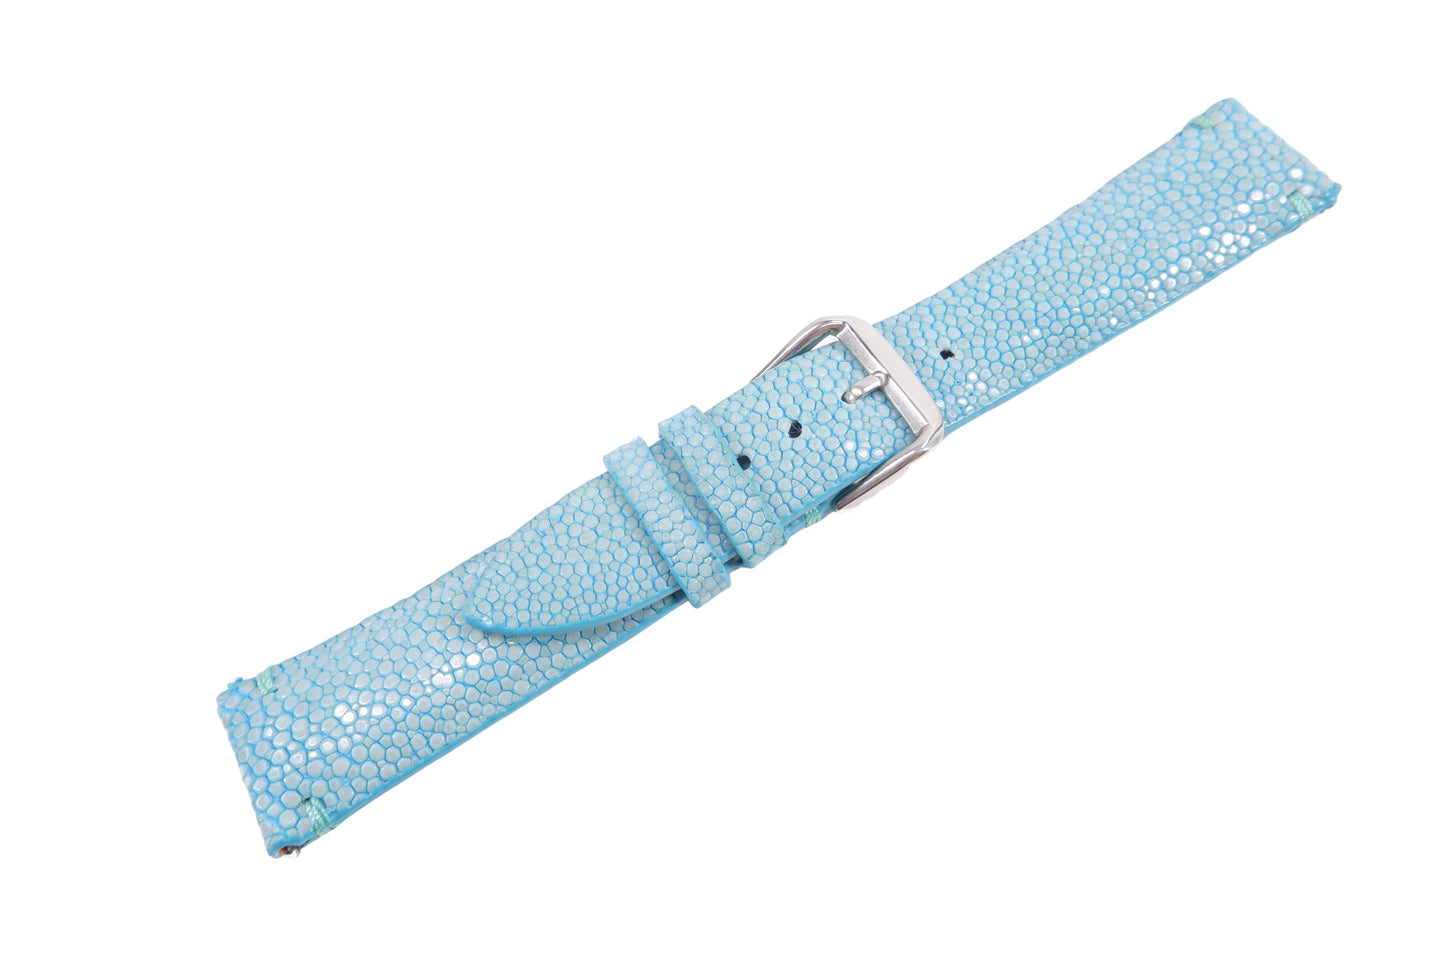 Genuine Polished Stingray Skin Leather Quick Release Watch Strap Blue Band with Buckle